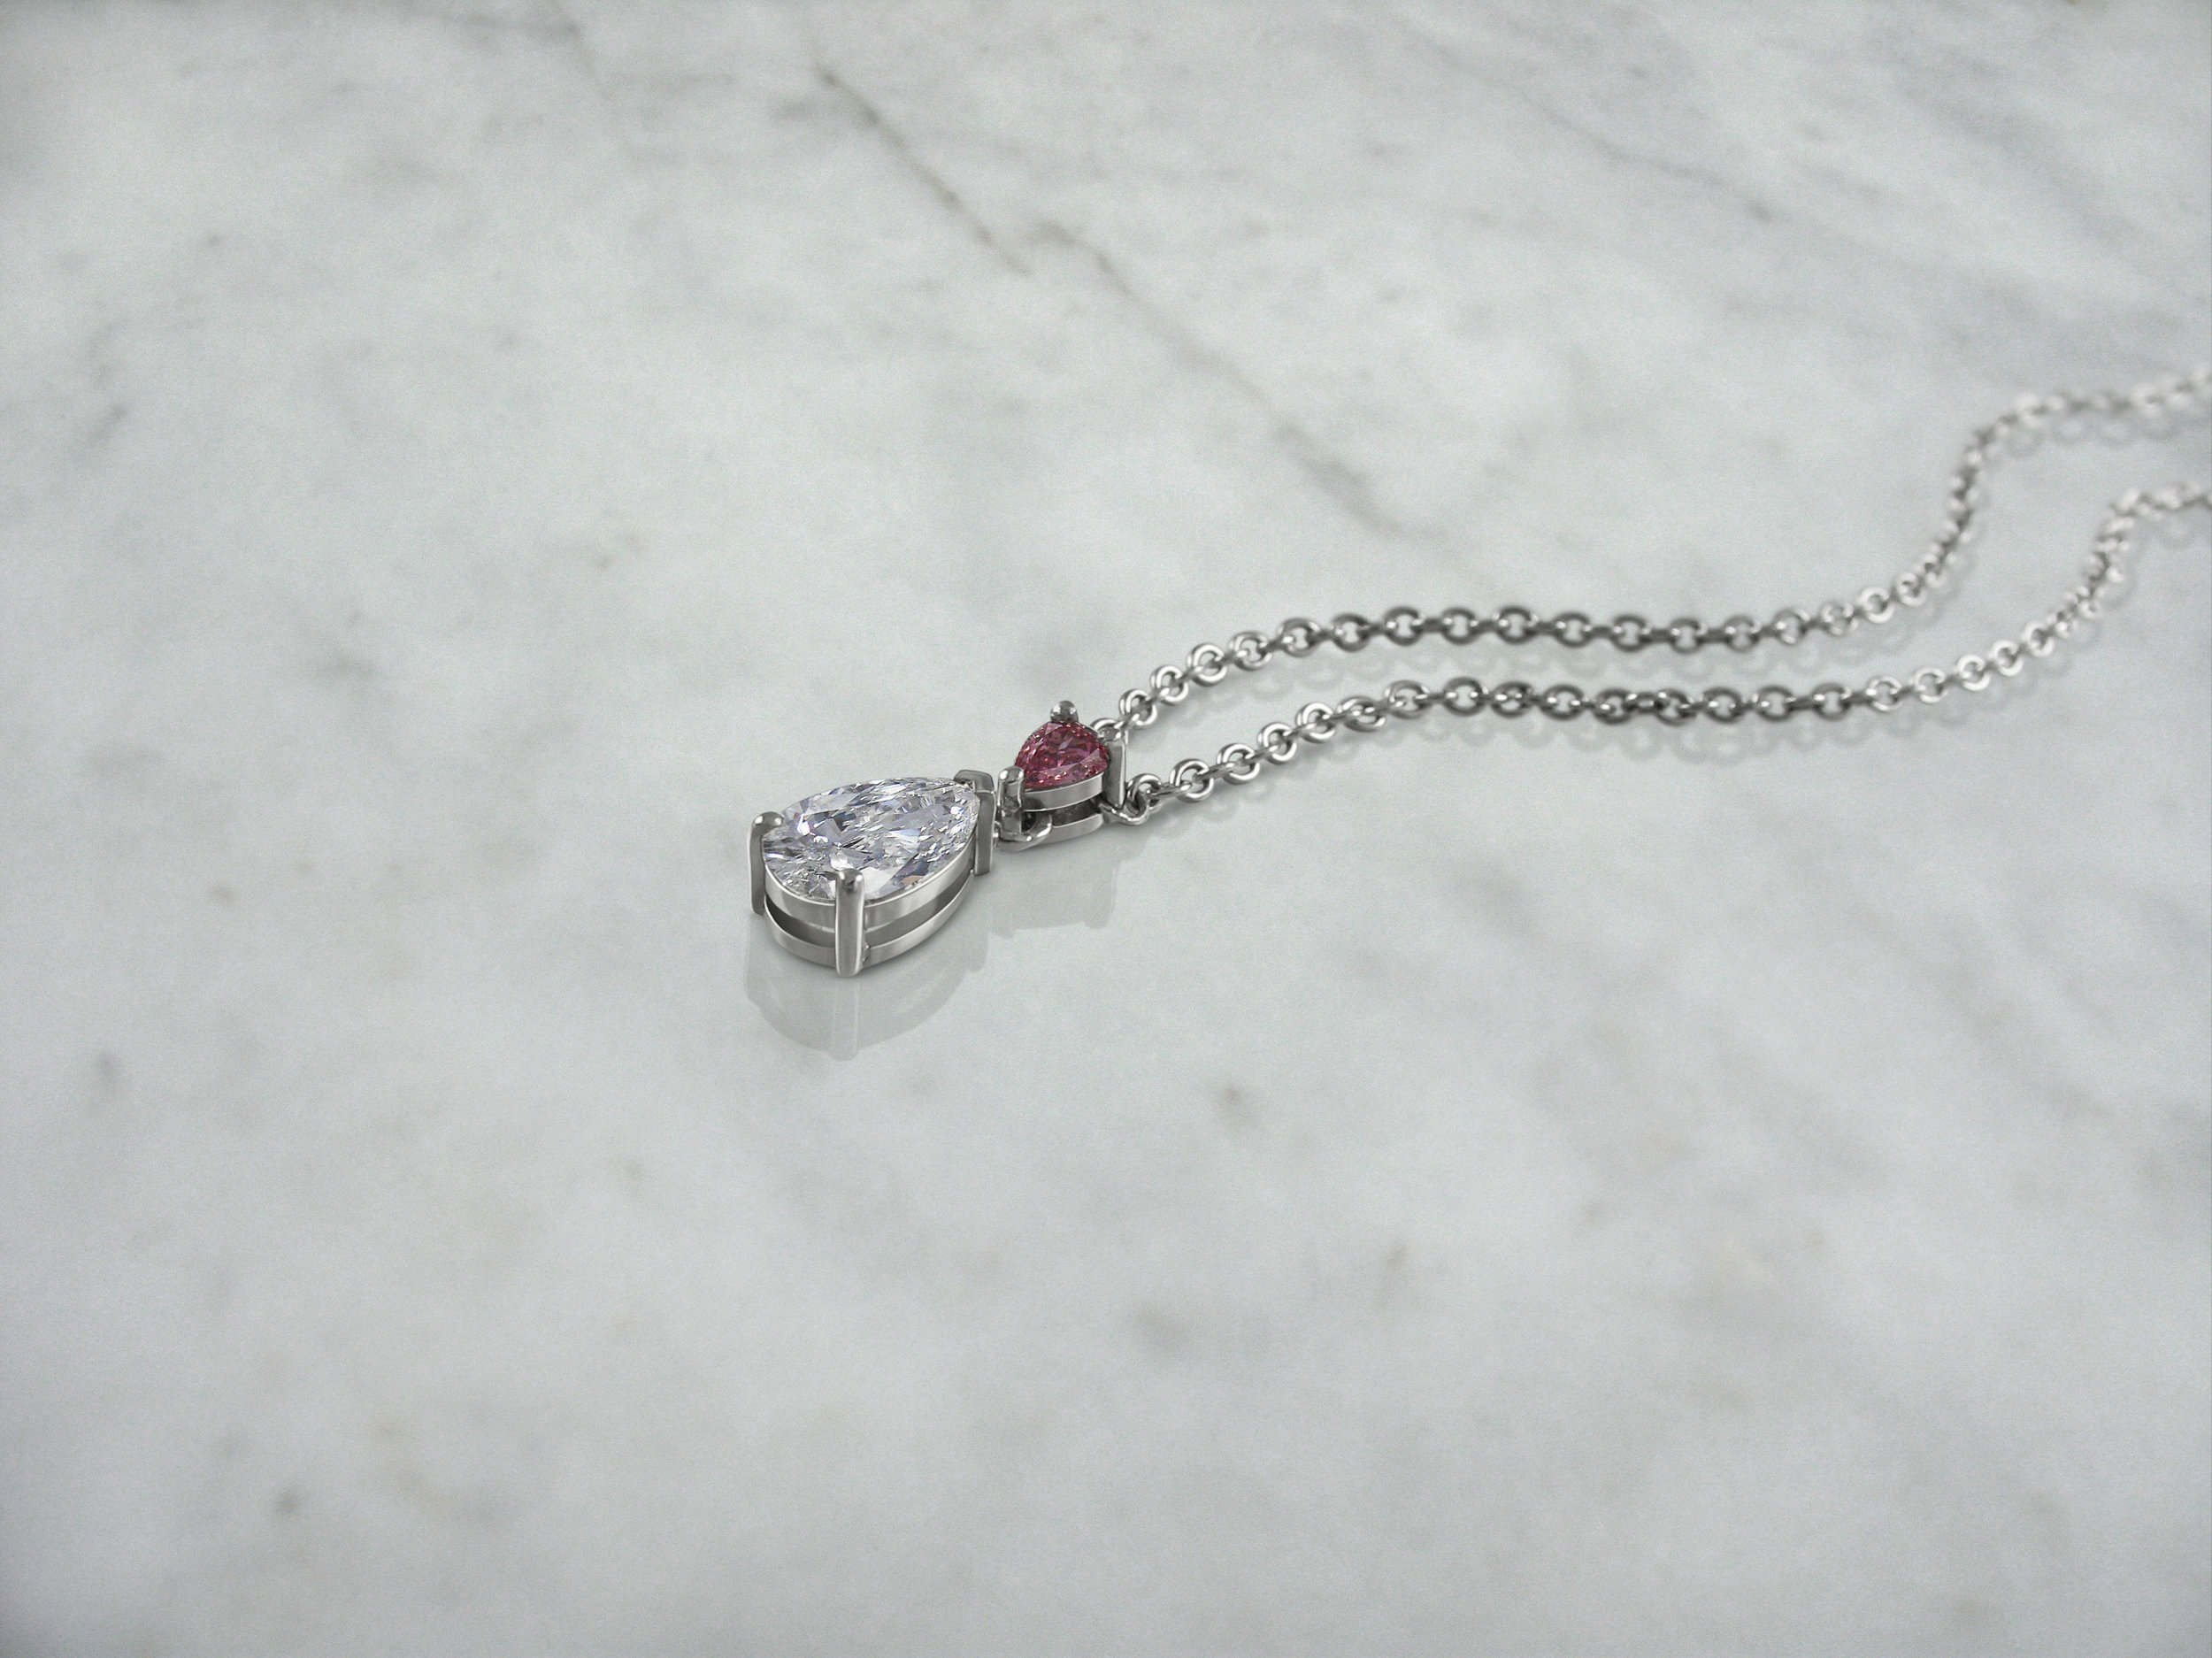 Pear shaped pink diamond and diamond pendant from the Fiorella collection